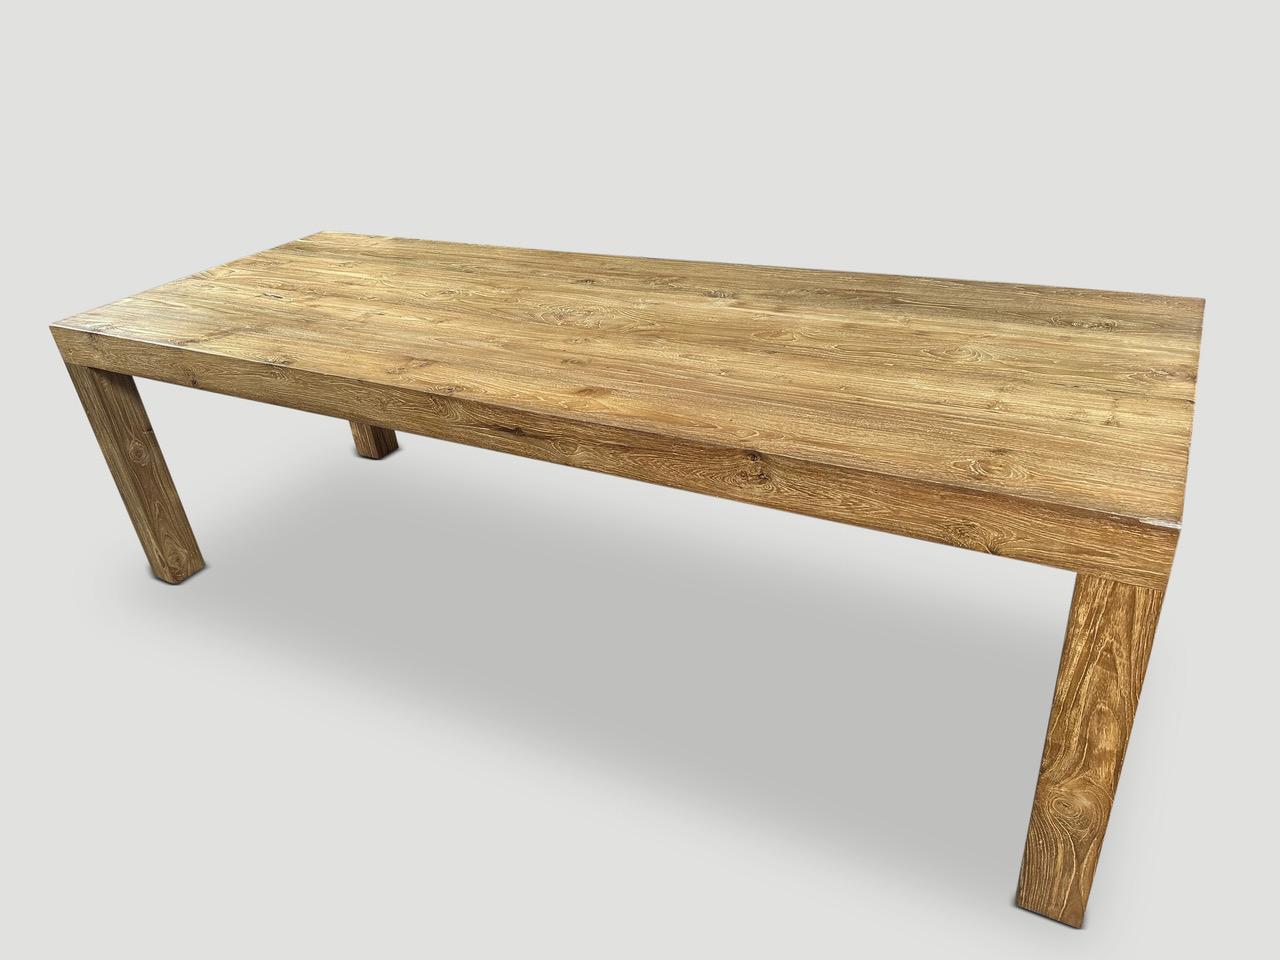 Impressive solid teak dining table hand made from seven 4” x 4” reclaimed teak logs. Finished with a natural oil revealing the beautiful wood grain. 

Own an Andrianna Shamaris original.

Andrianna Shamaris. The Leader In Modern Organic Design. 